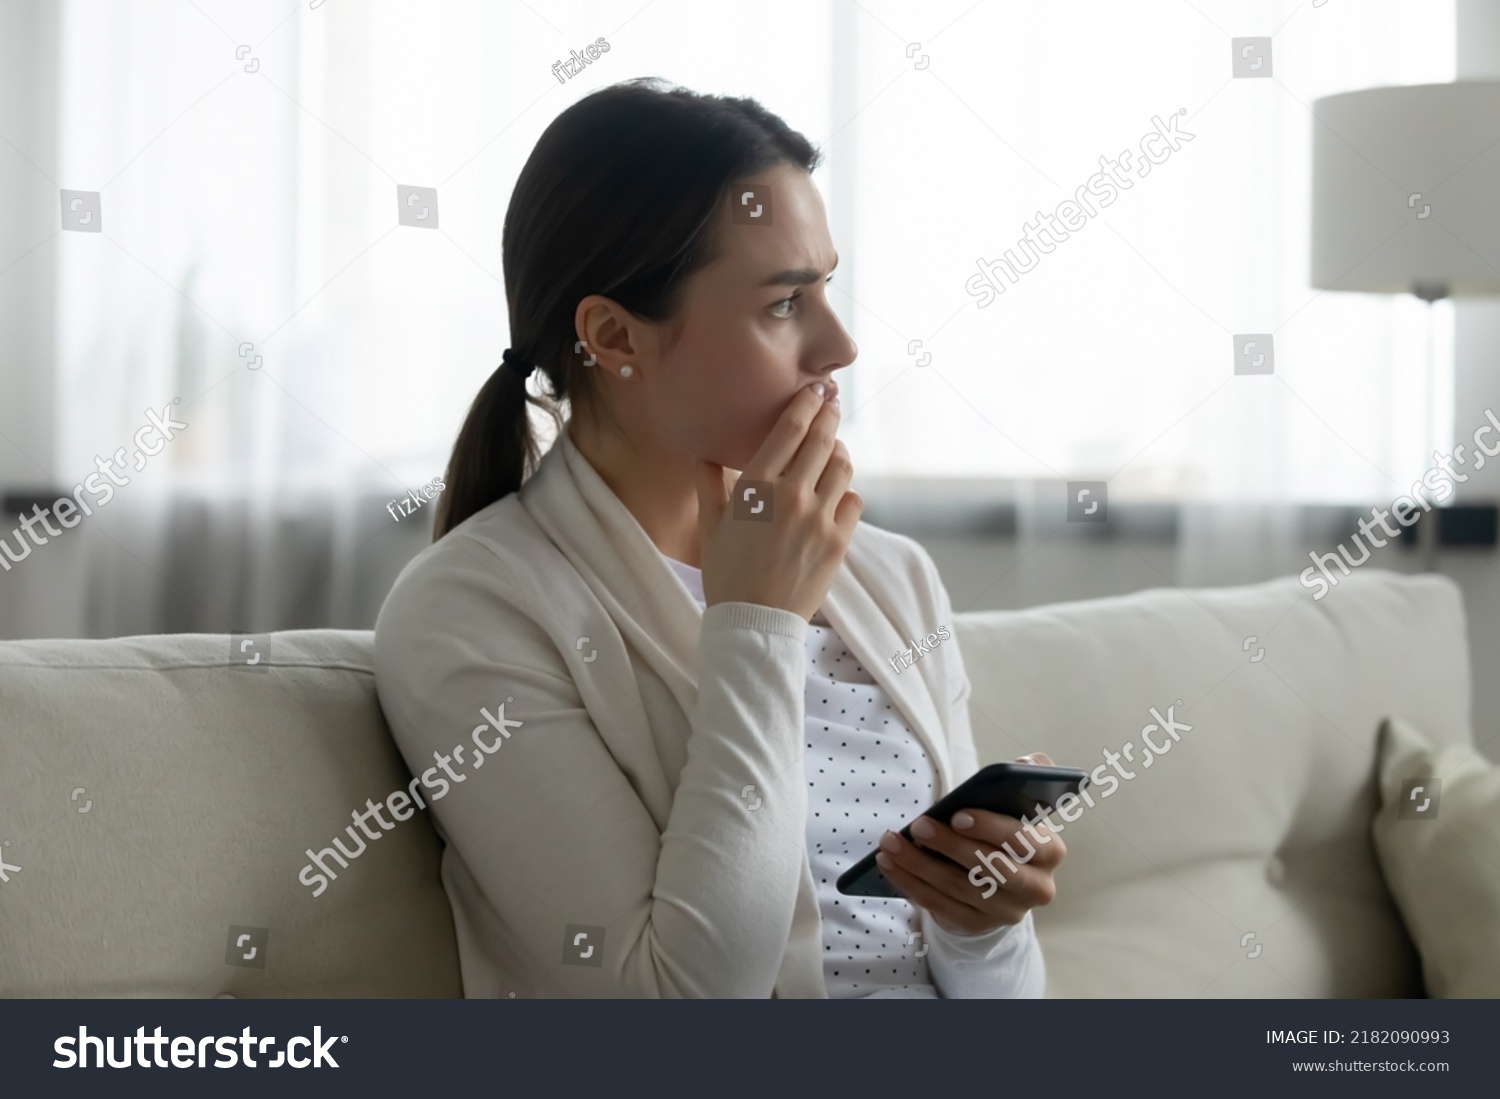 Pensive stressed young Caucasian woman sit on sofa at home using cellphone look in distance pondering of problem. Anxious millennial girl feel distressed frustrated with message or text on smartphone. #2182090993